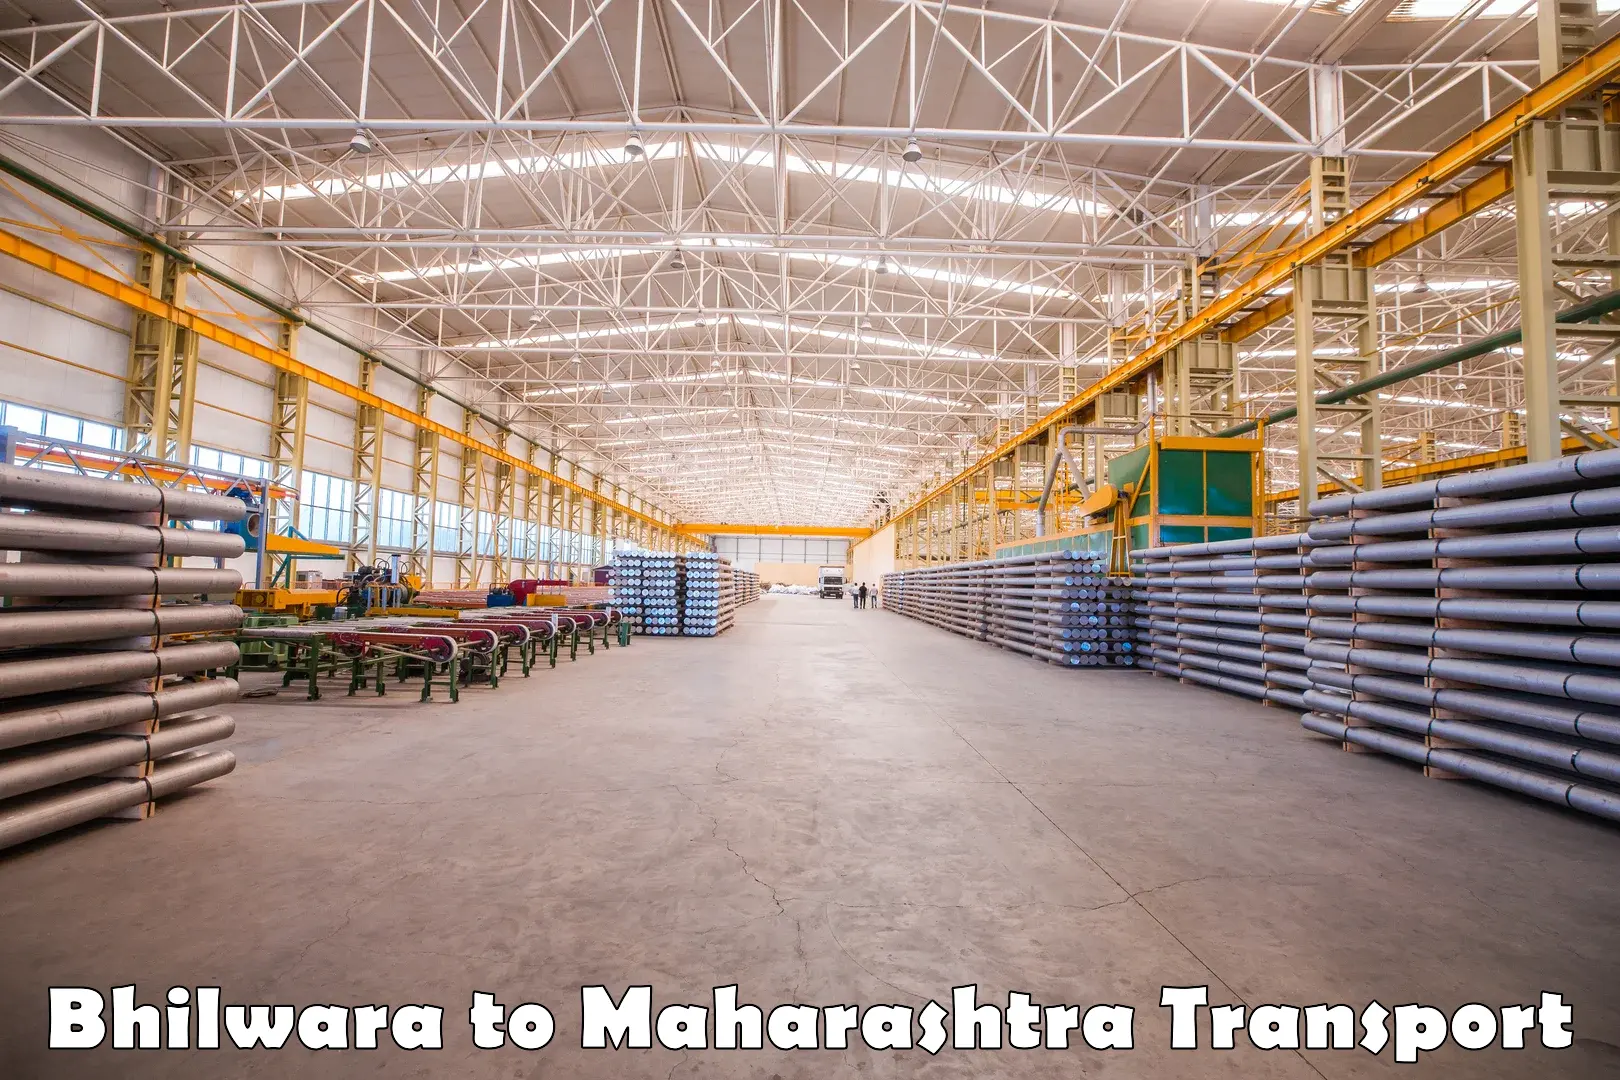 Shipping services in Bhilwara to Alephata